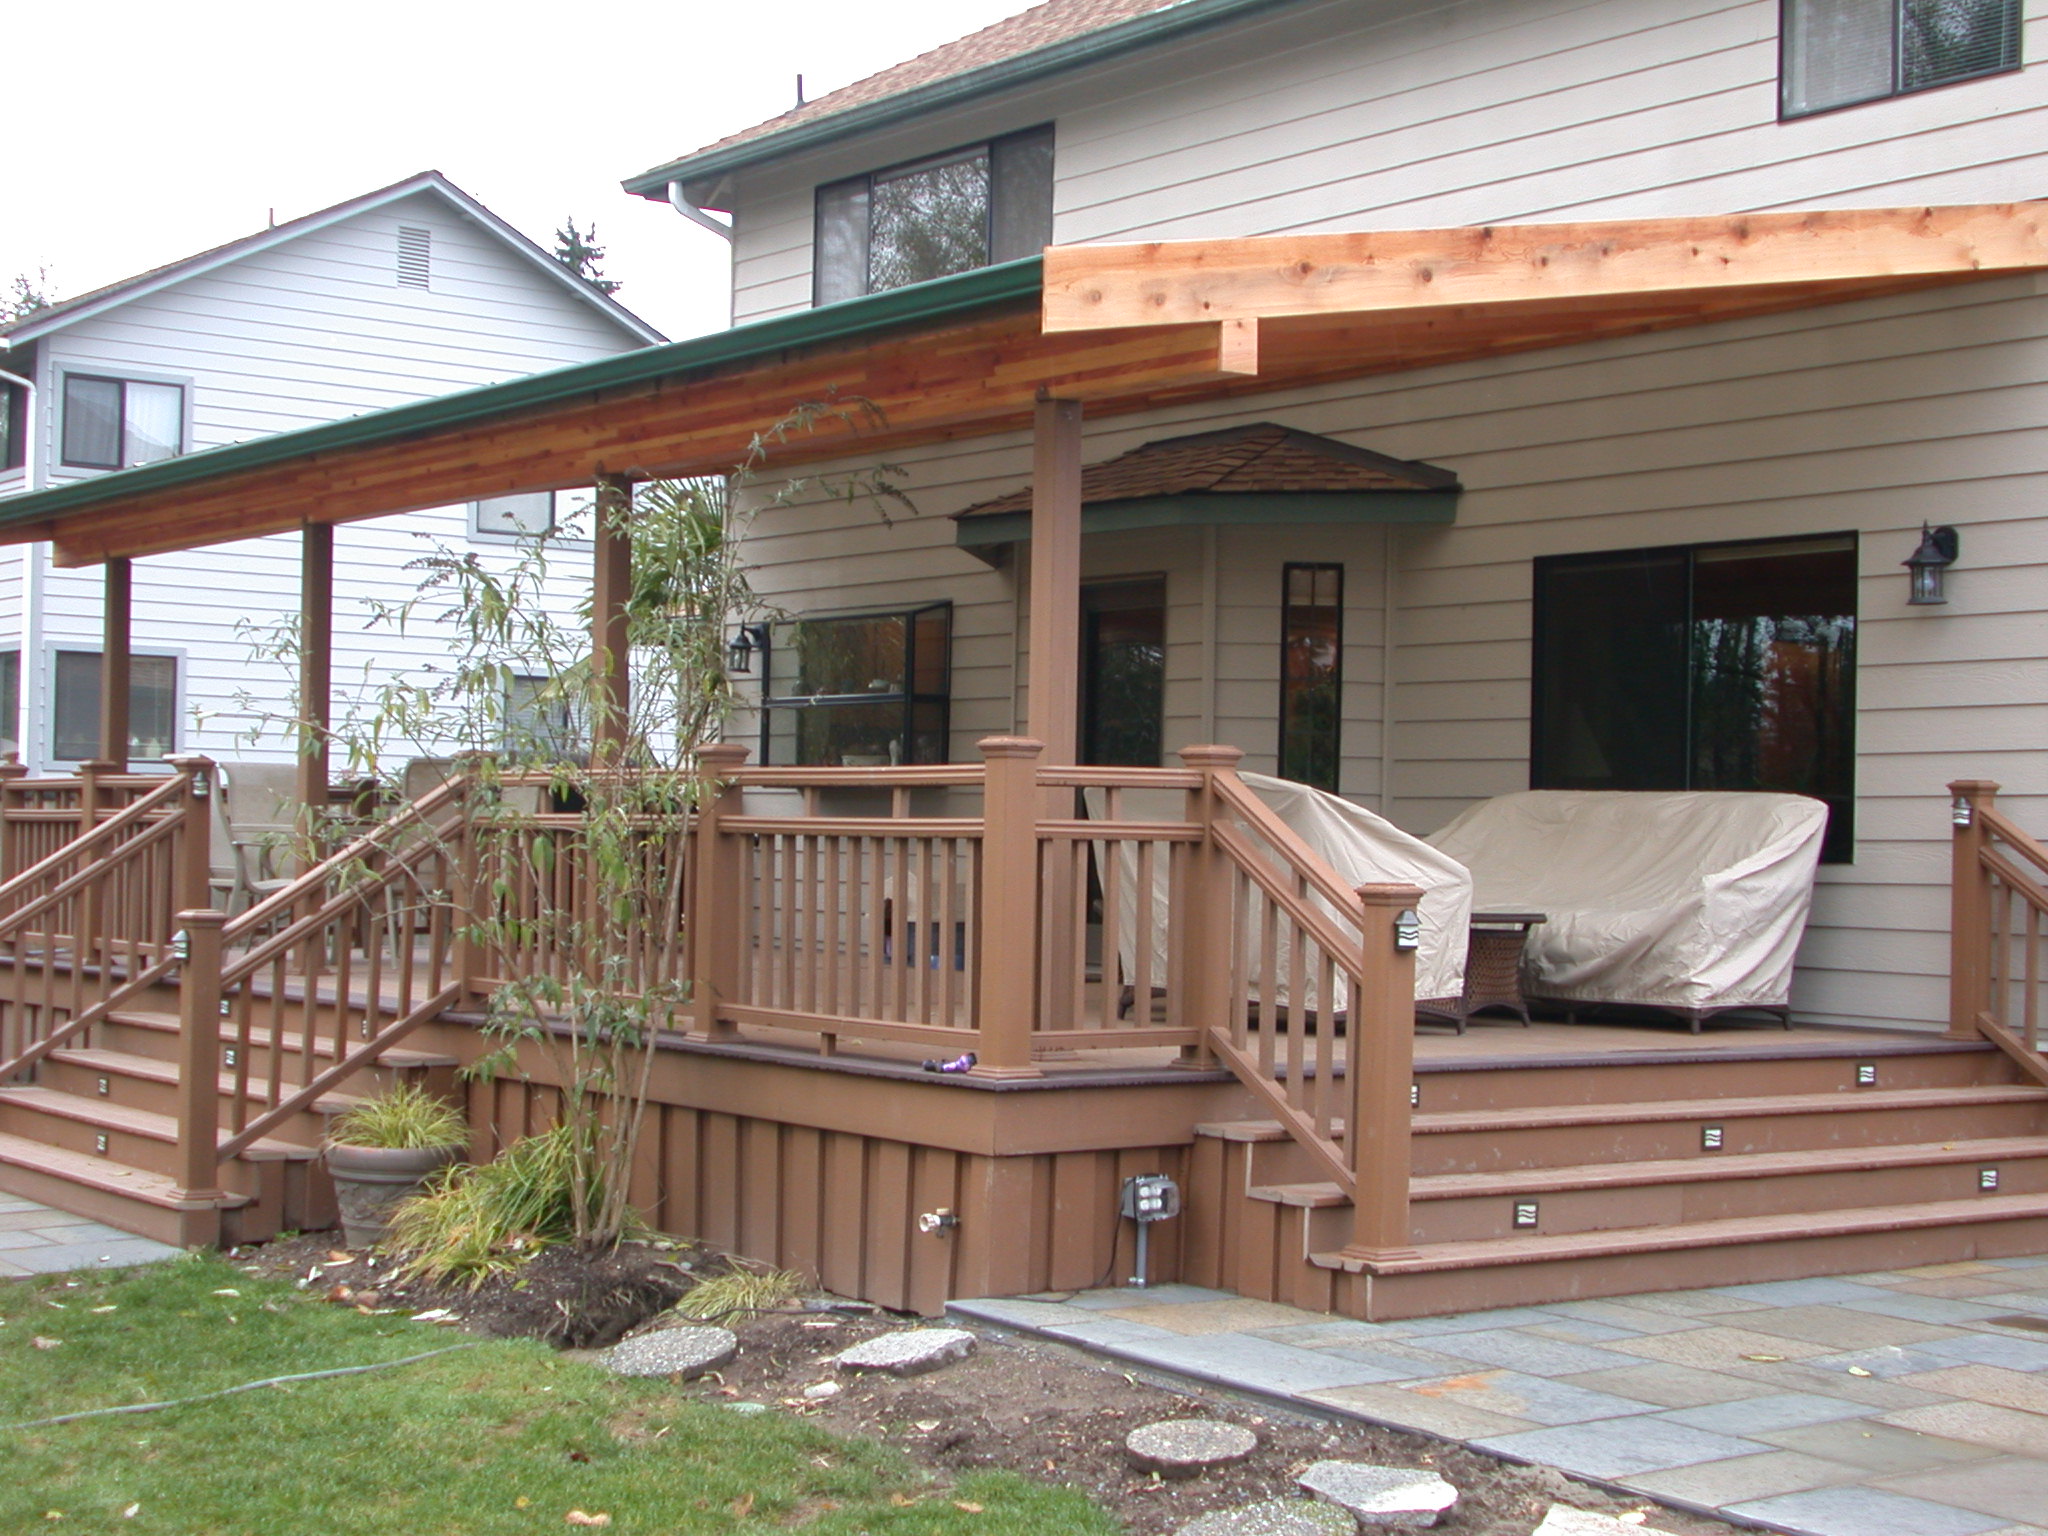 Here is a side view of the Glulam-beamed patio cover.